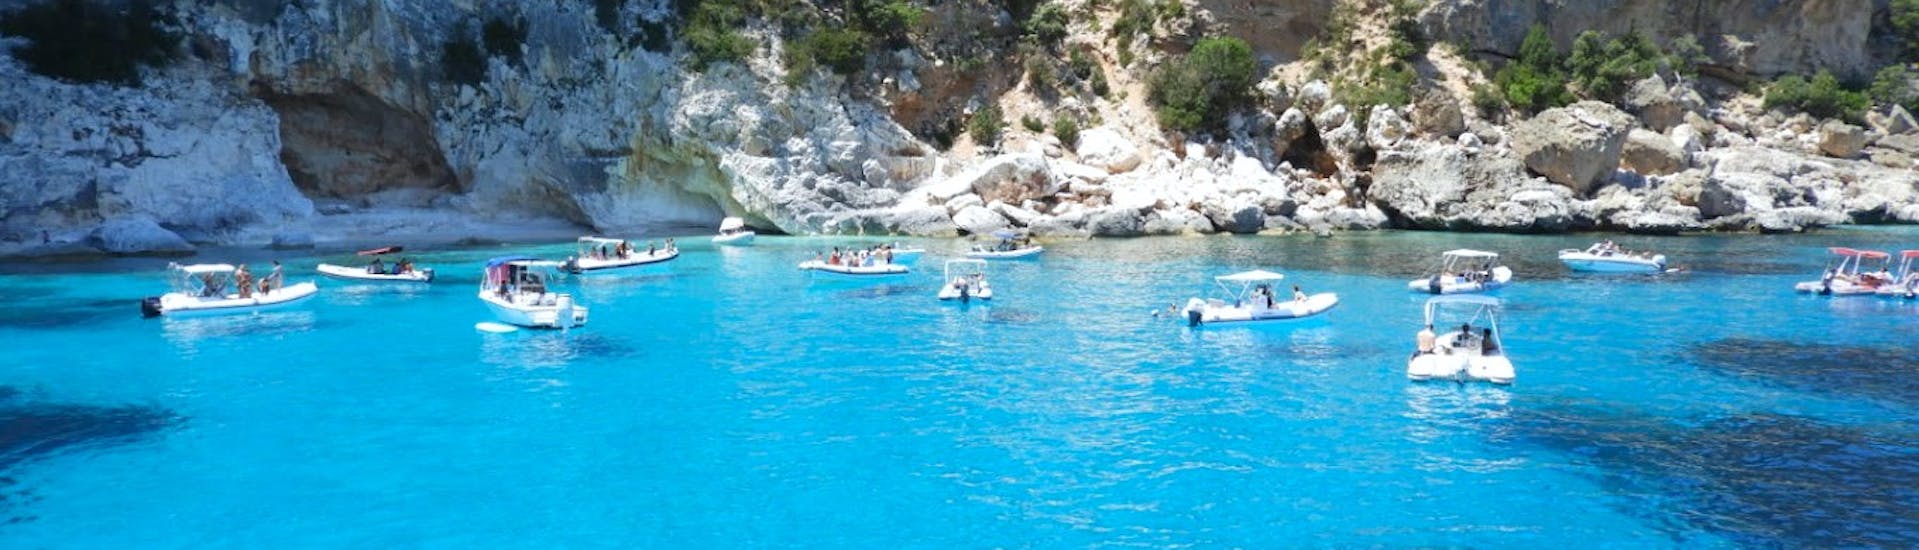 Picture of Cala Biriola taken during the RIB Boat Trip to the Gulf of Orosei from Arbatax with Blue Line Arbatax.